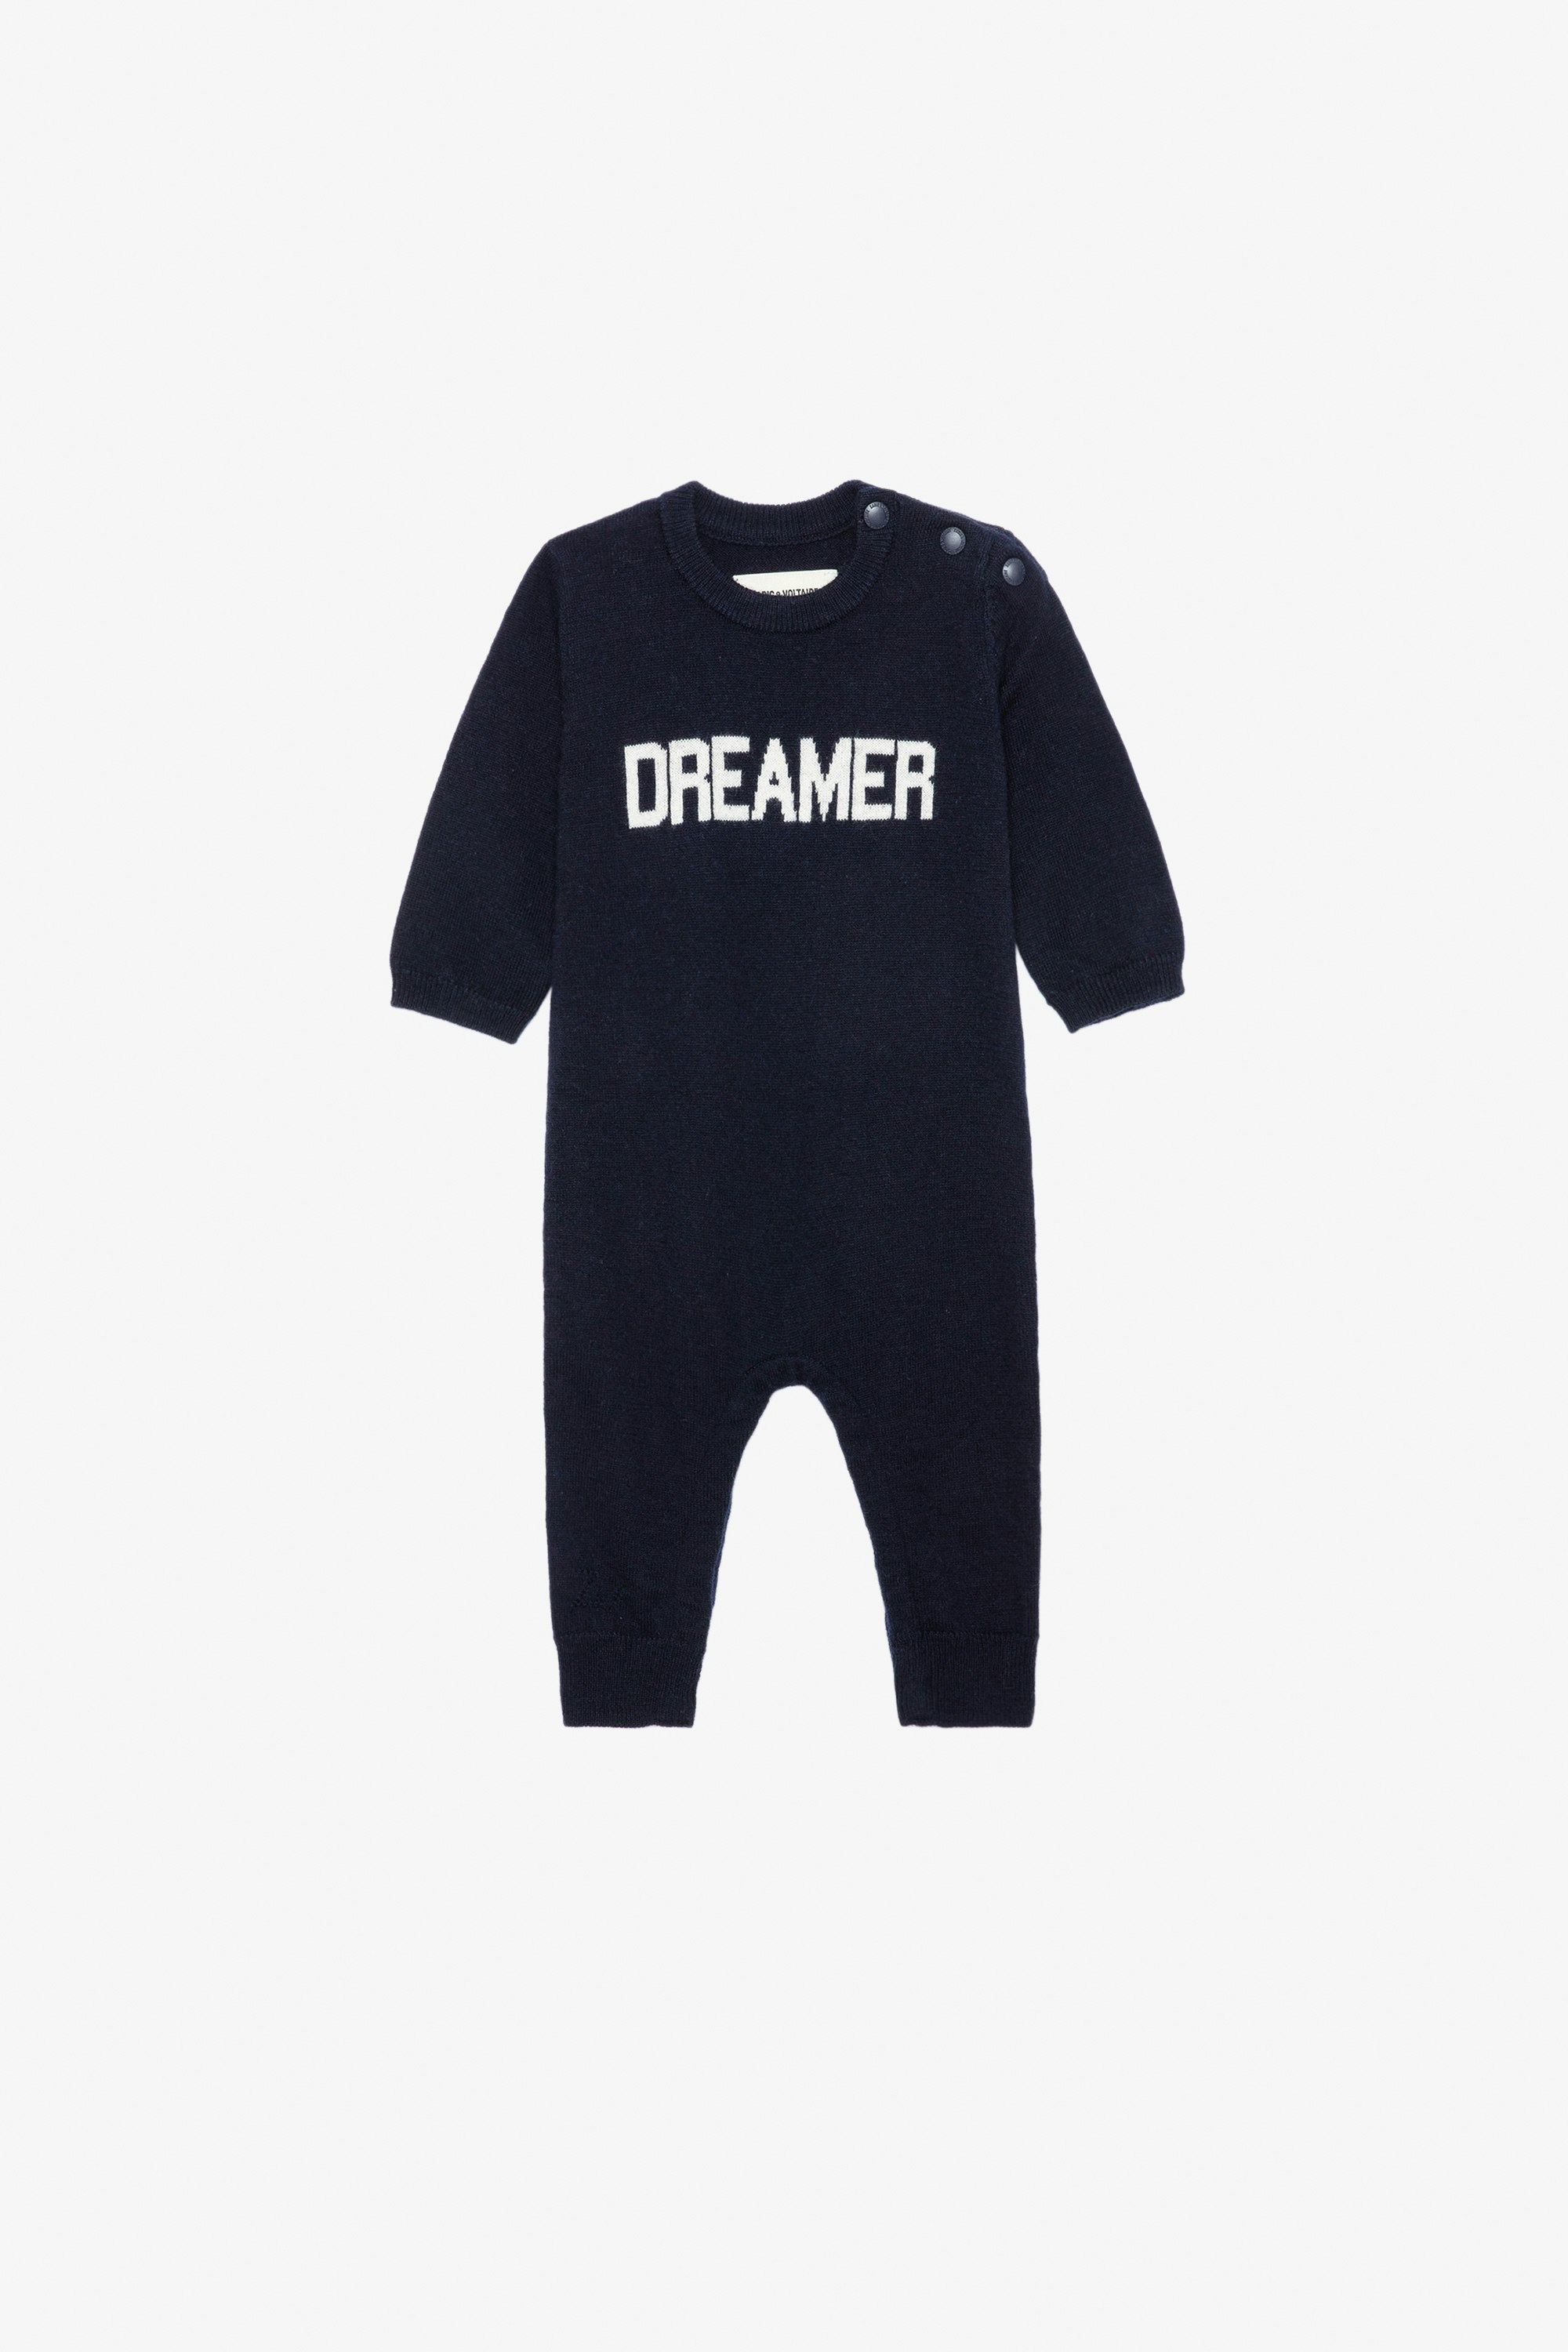 Didou Baby Sleepsuit - Navy blue knit baby sleepsuit with “Dreamer” slogan.